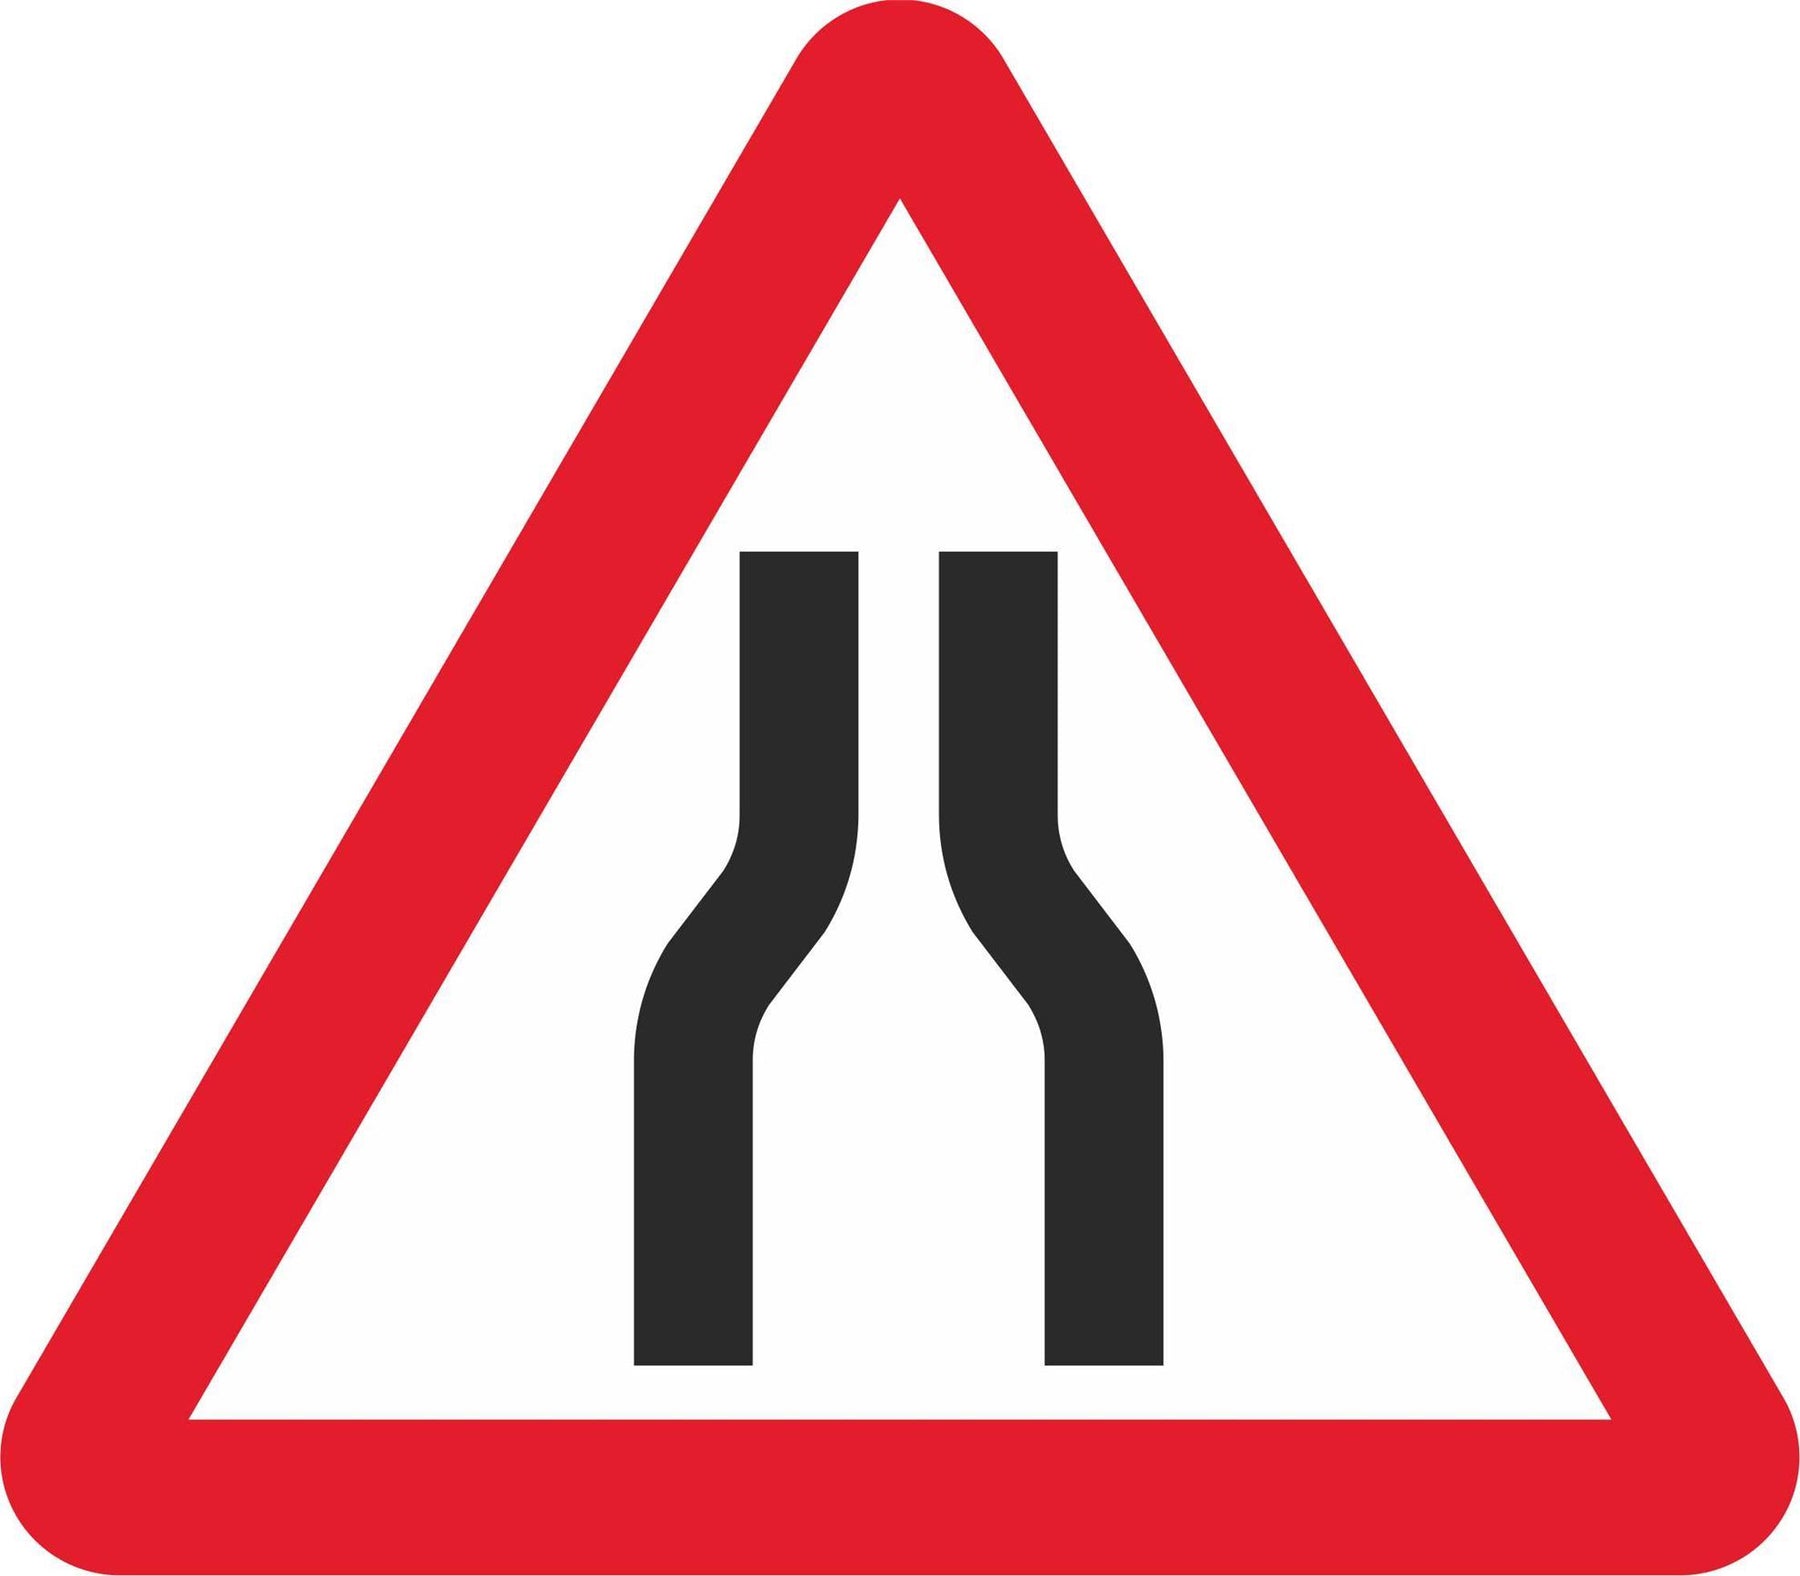 Road Narrows on Both Sides - Road Traffic Sign